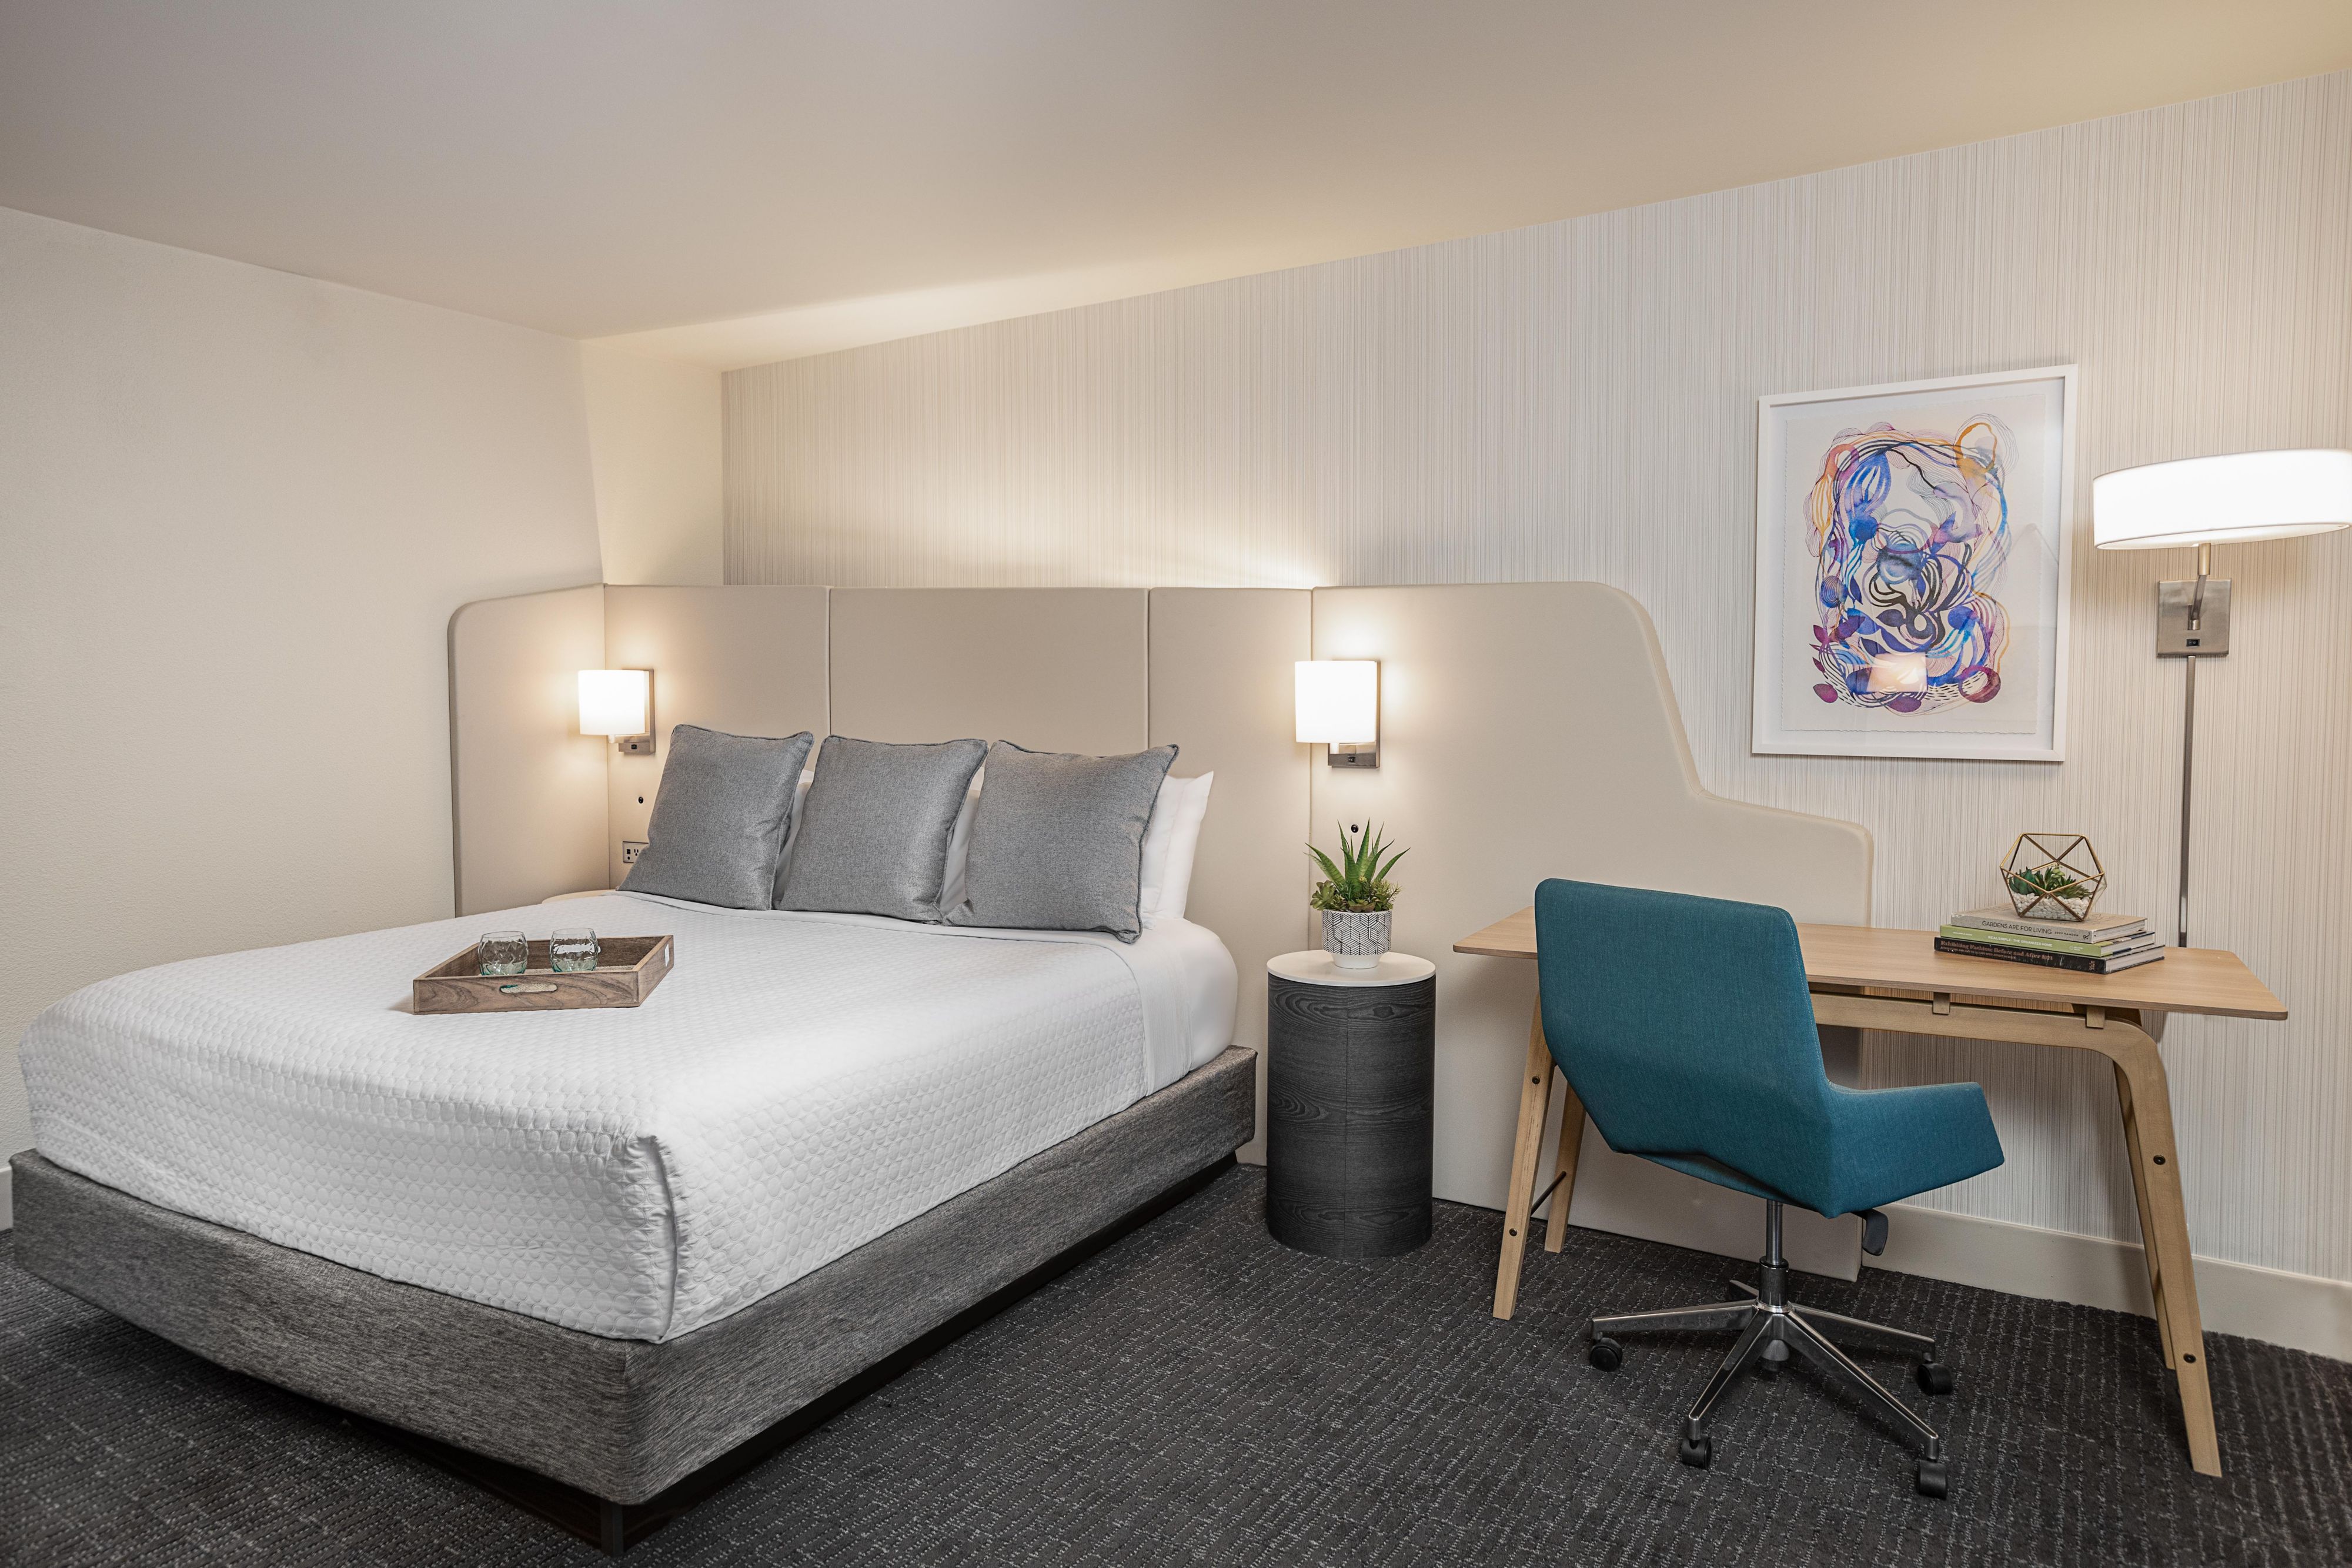 WorkLife rooms give flexibility for a more productive tomorrow.